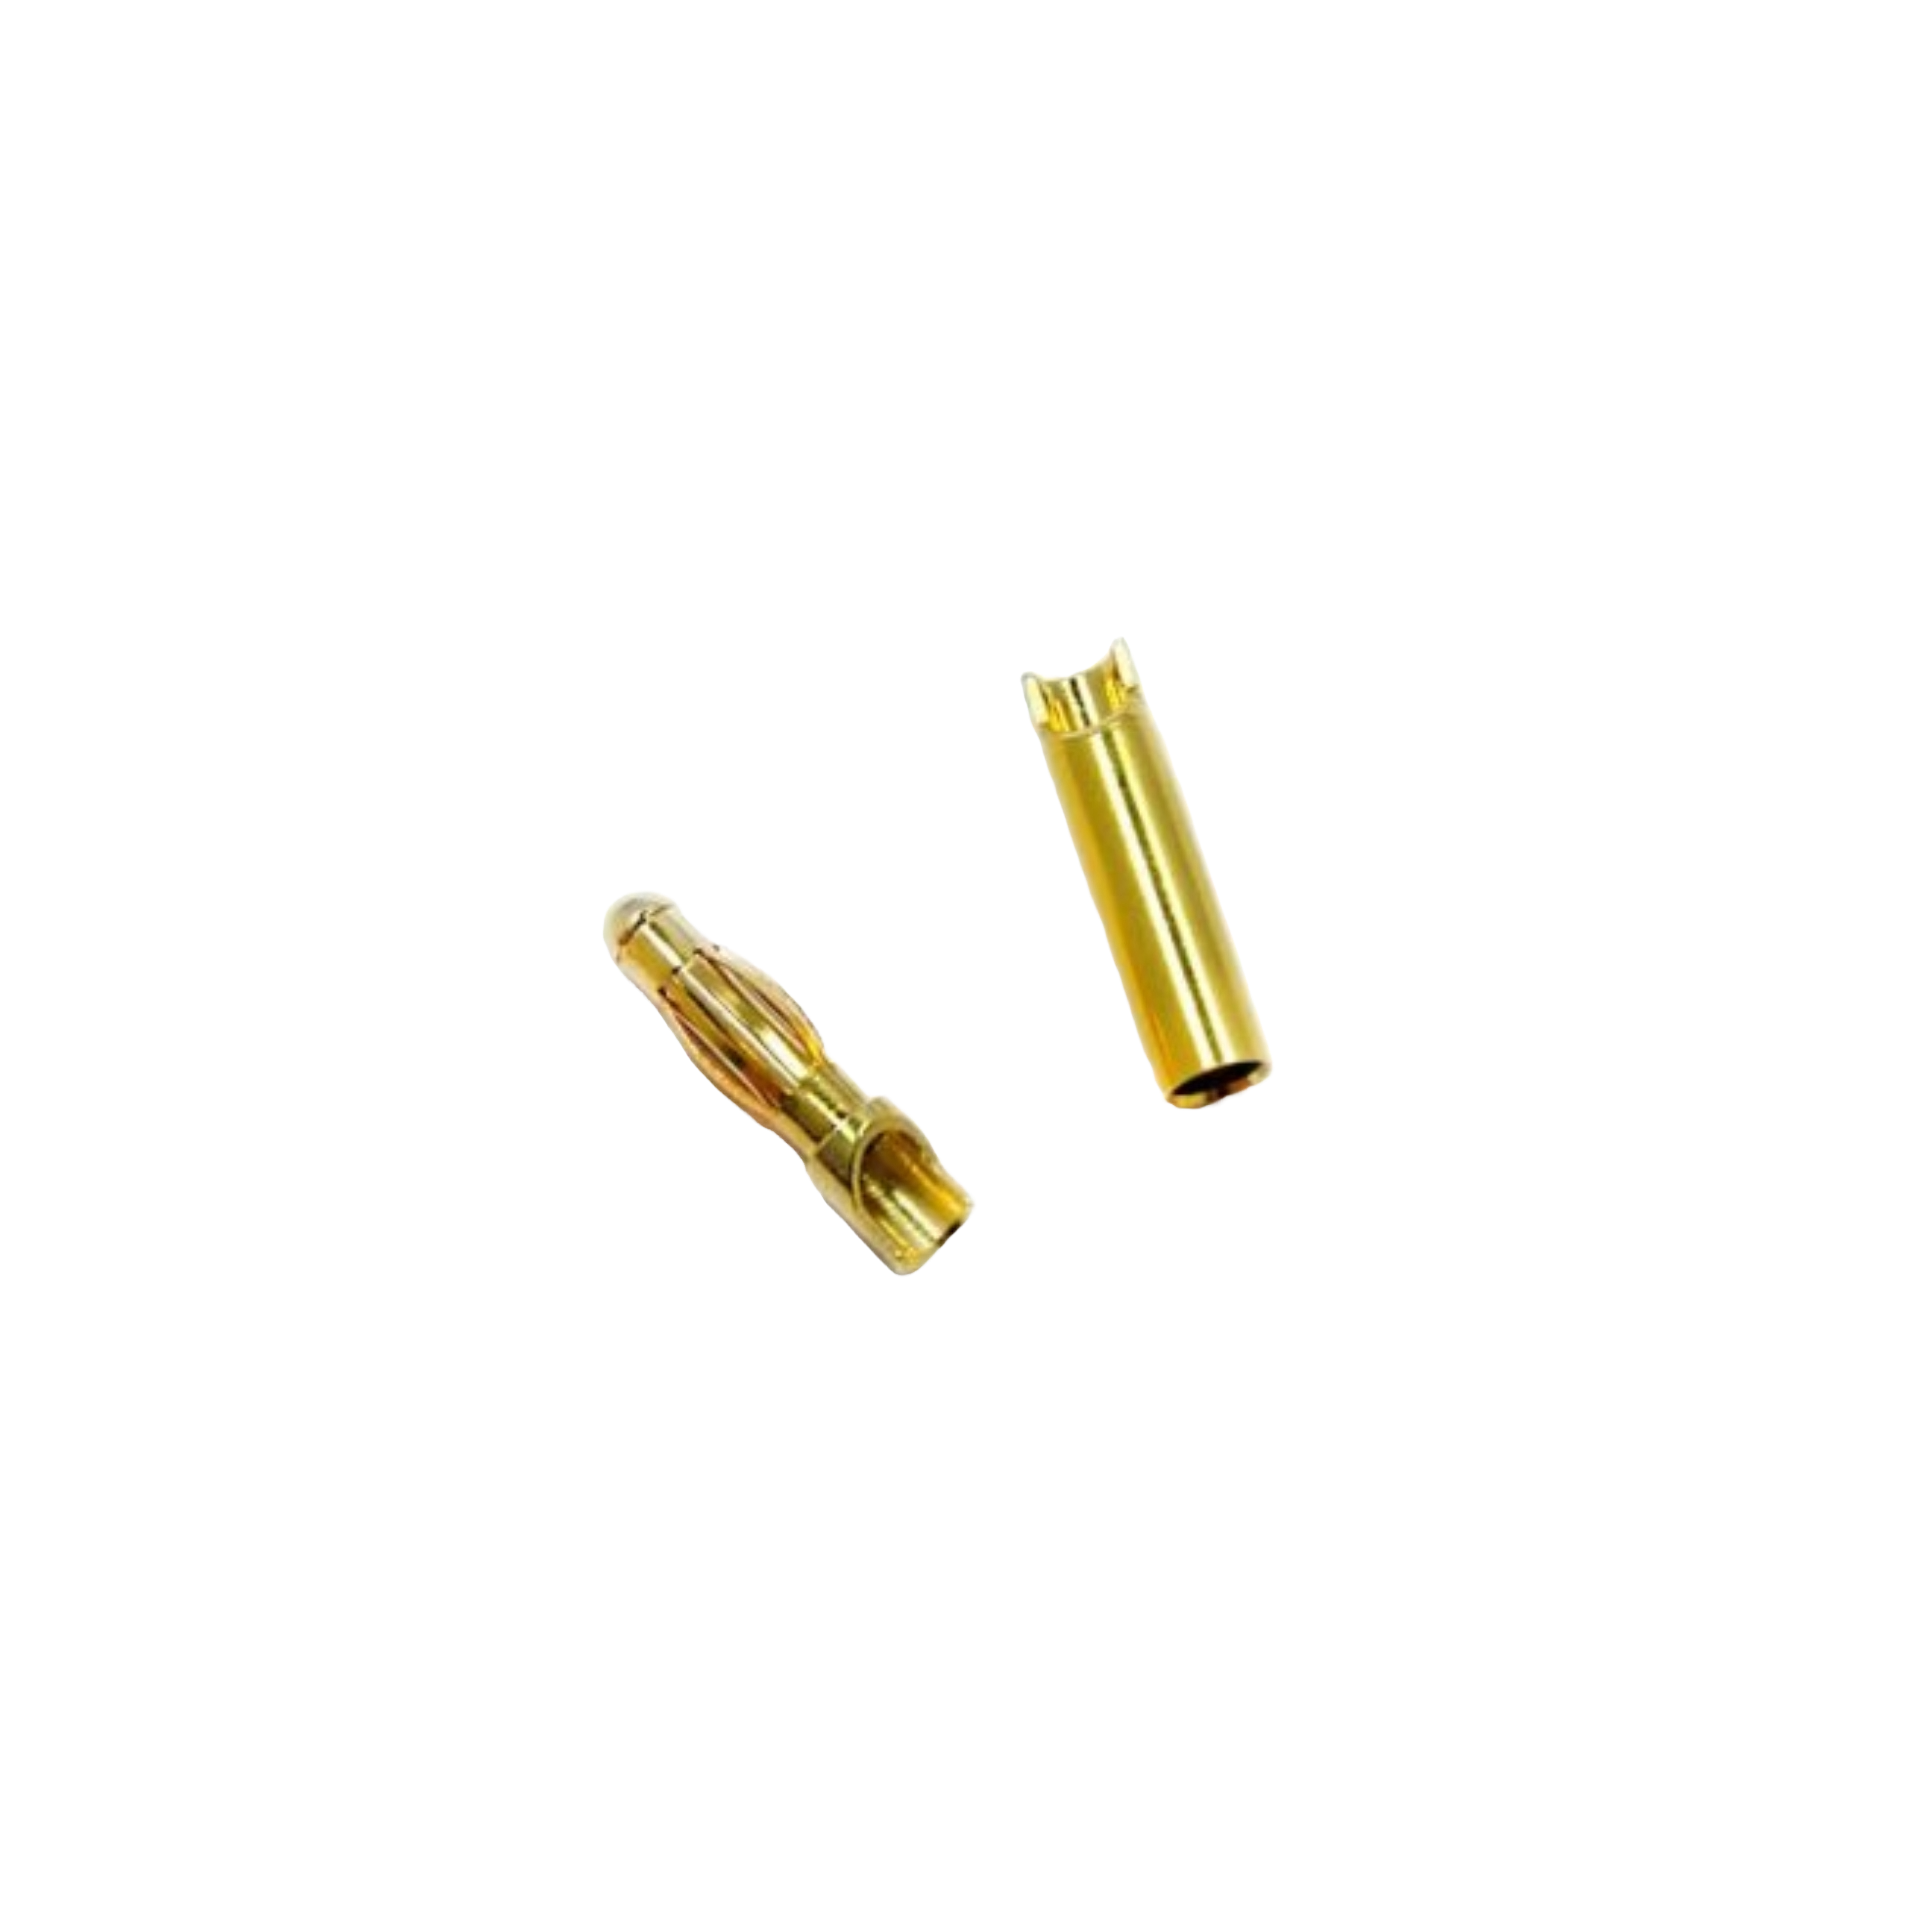 2mm Gold Bullet Connector (10x Male/Female) - DroneDynamics.ca